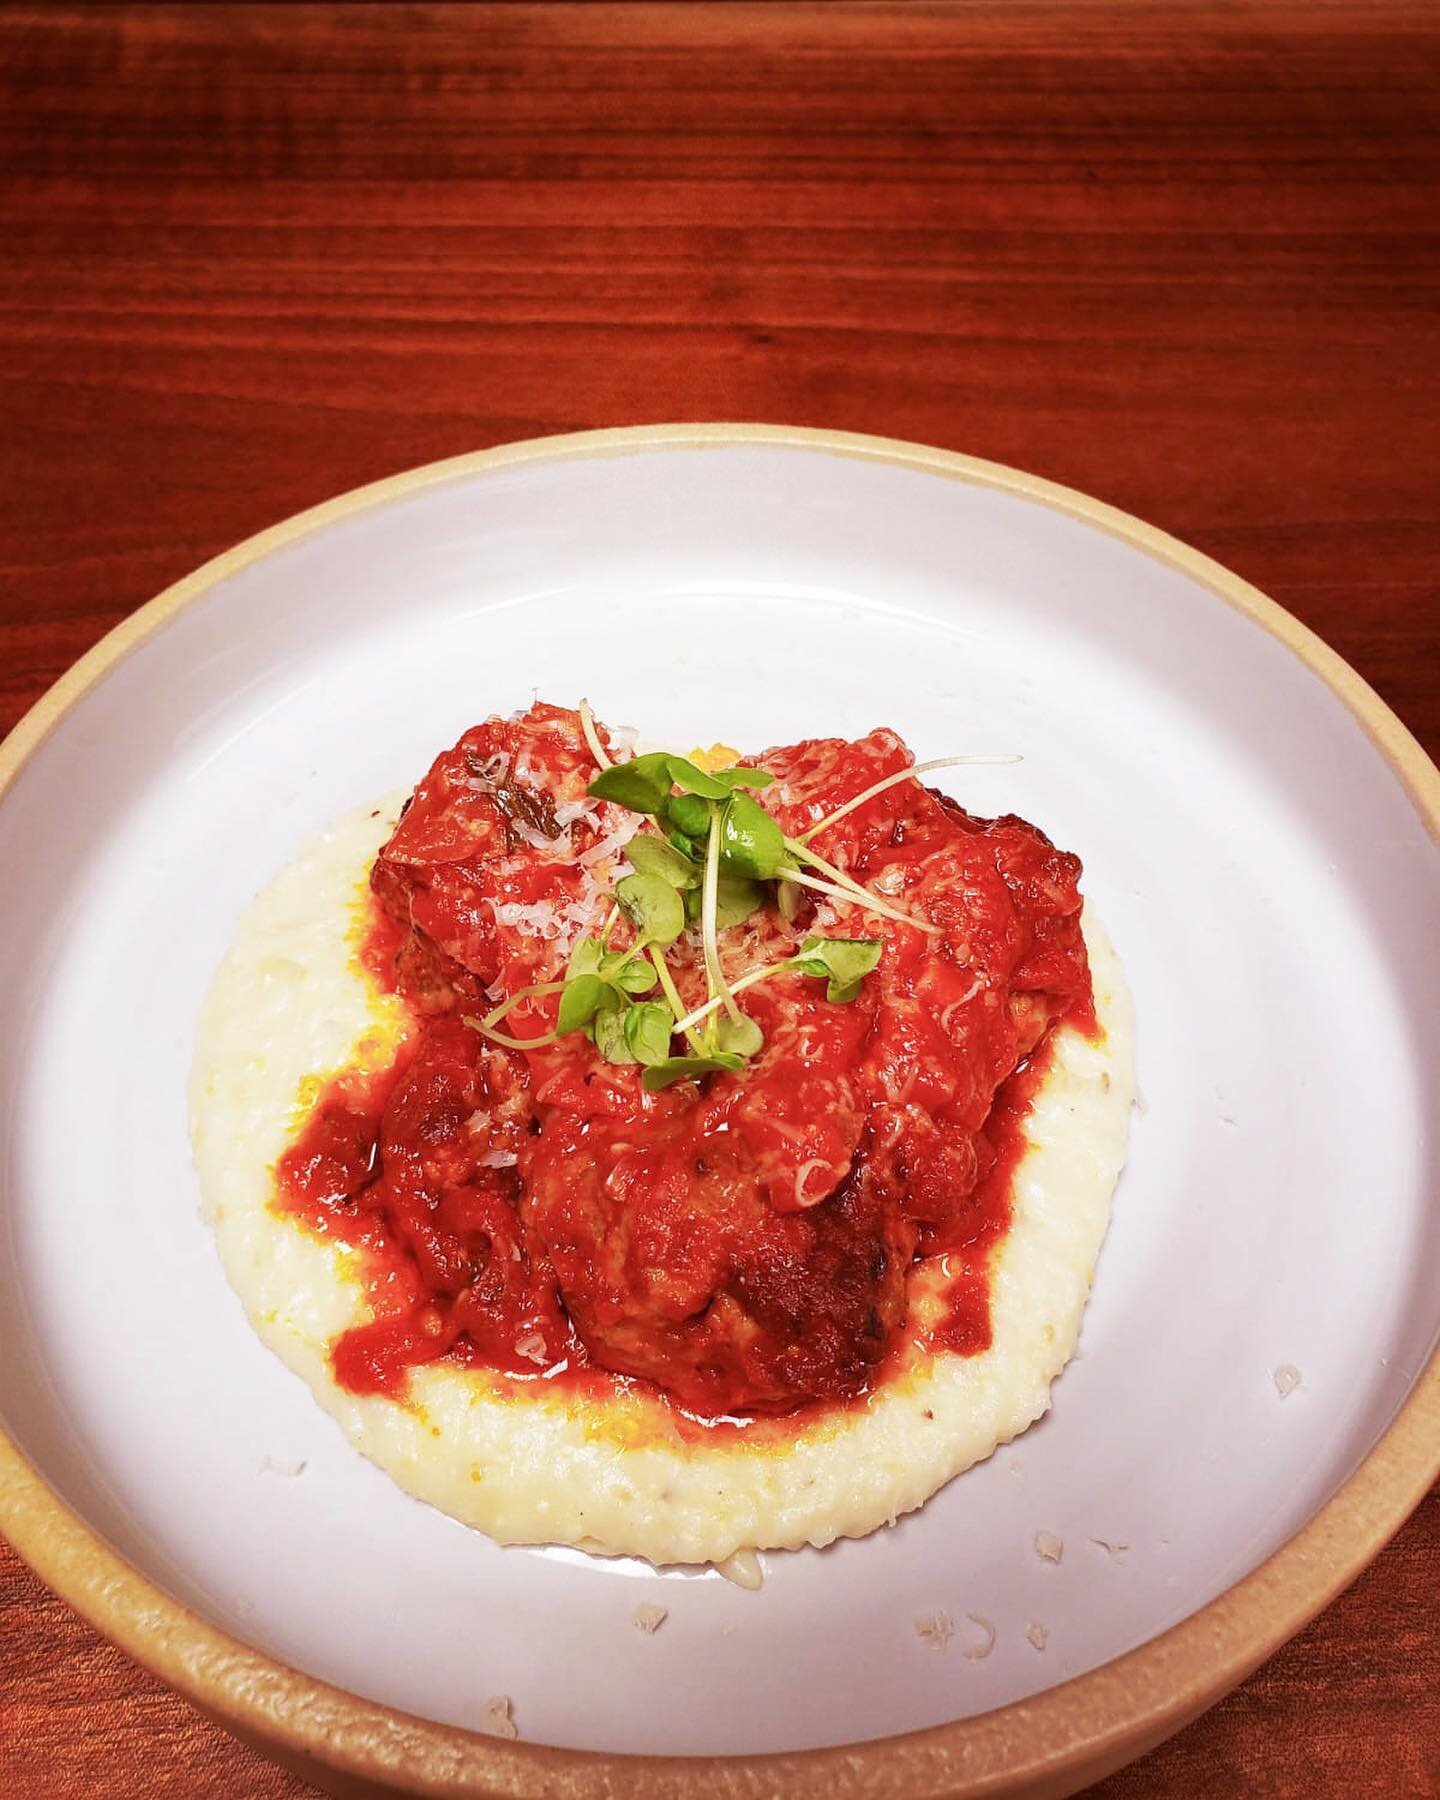 On the menu tonight is braised ricotta meatballs over castle valley mill grits 😍